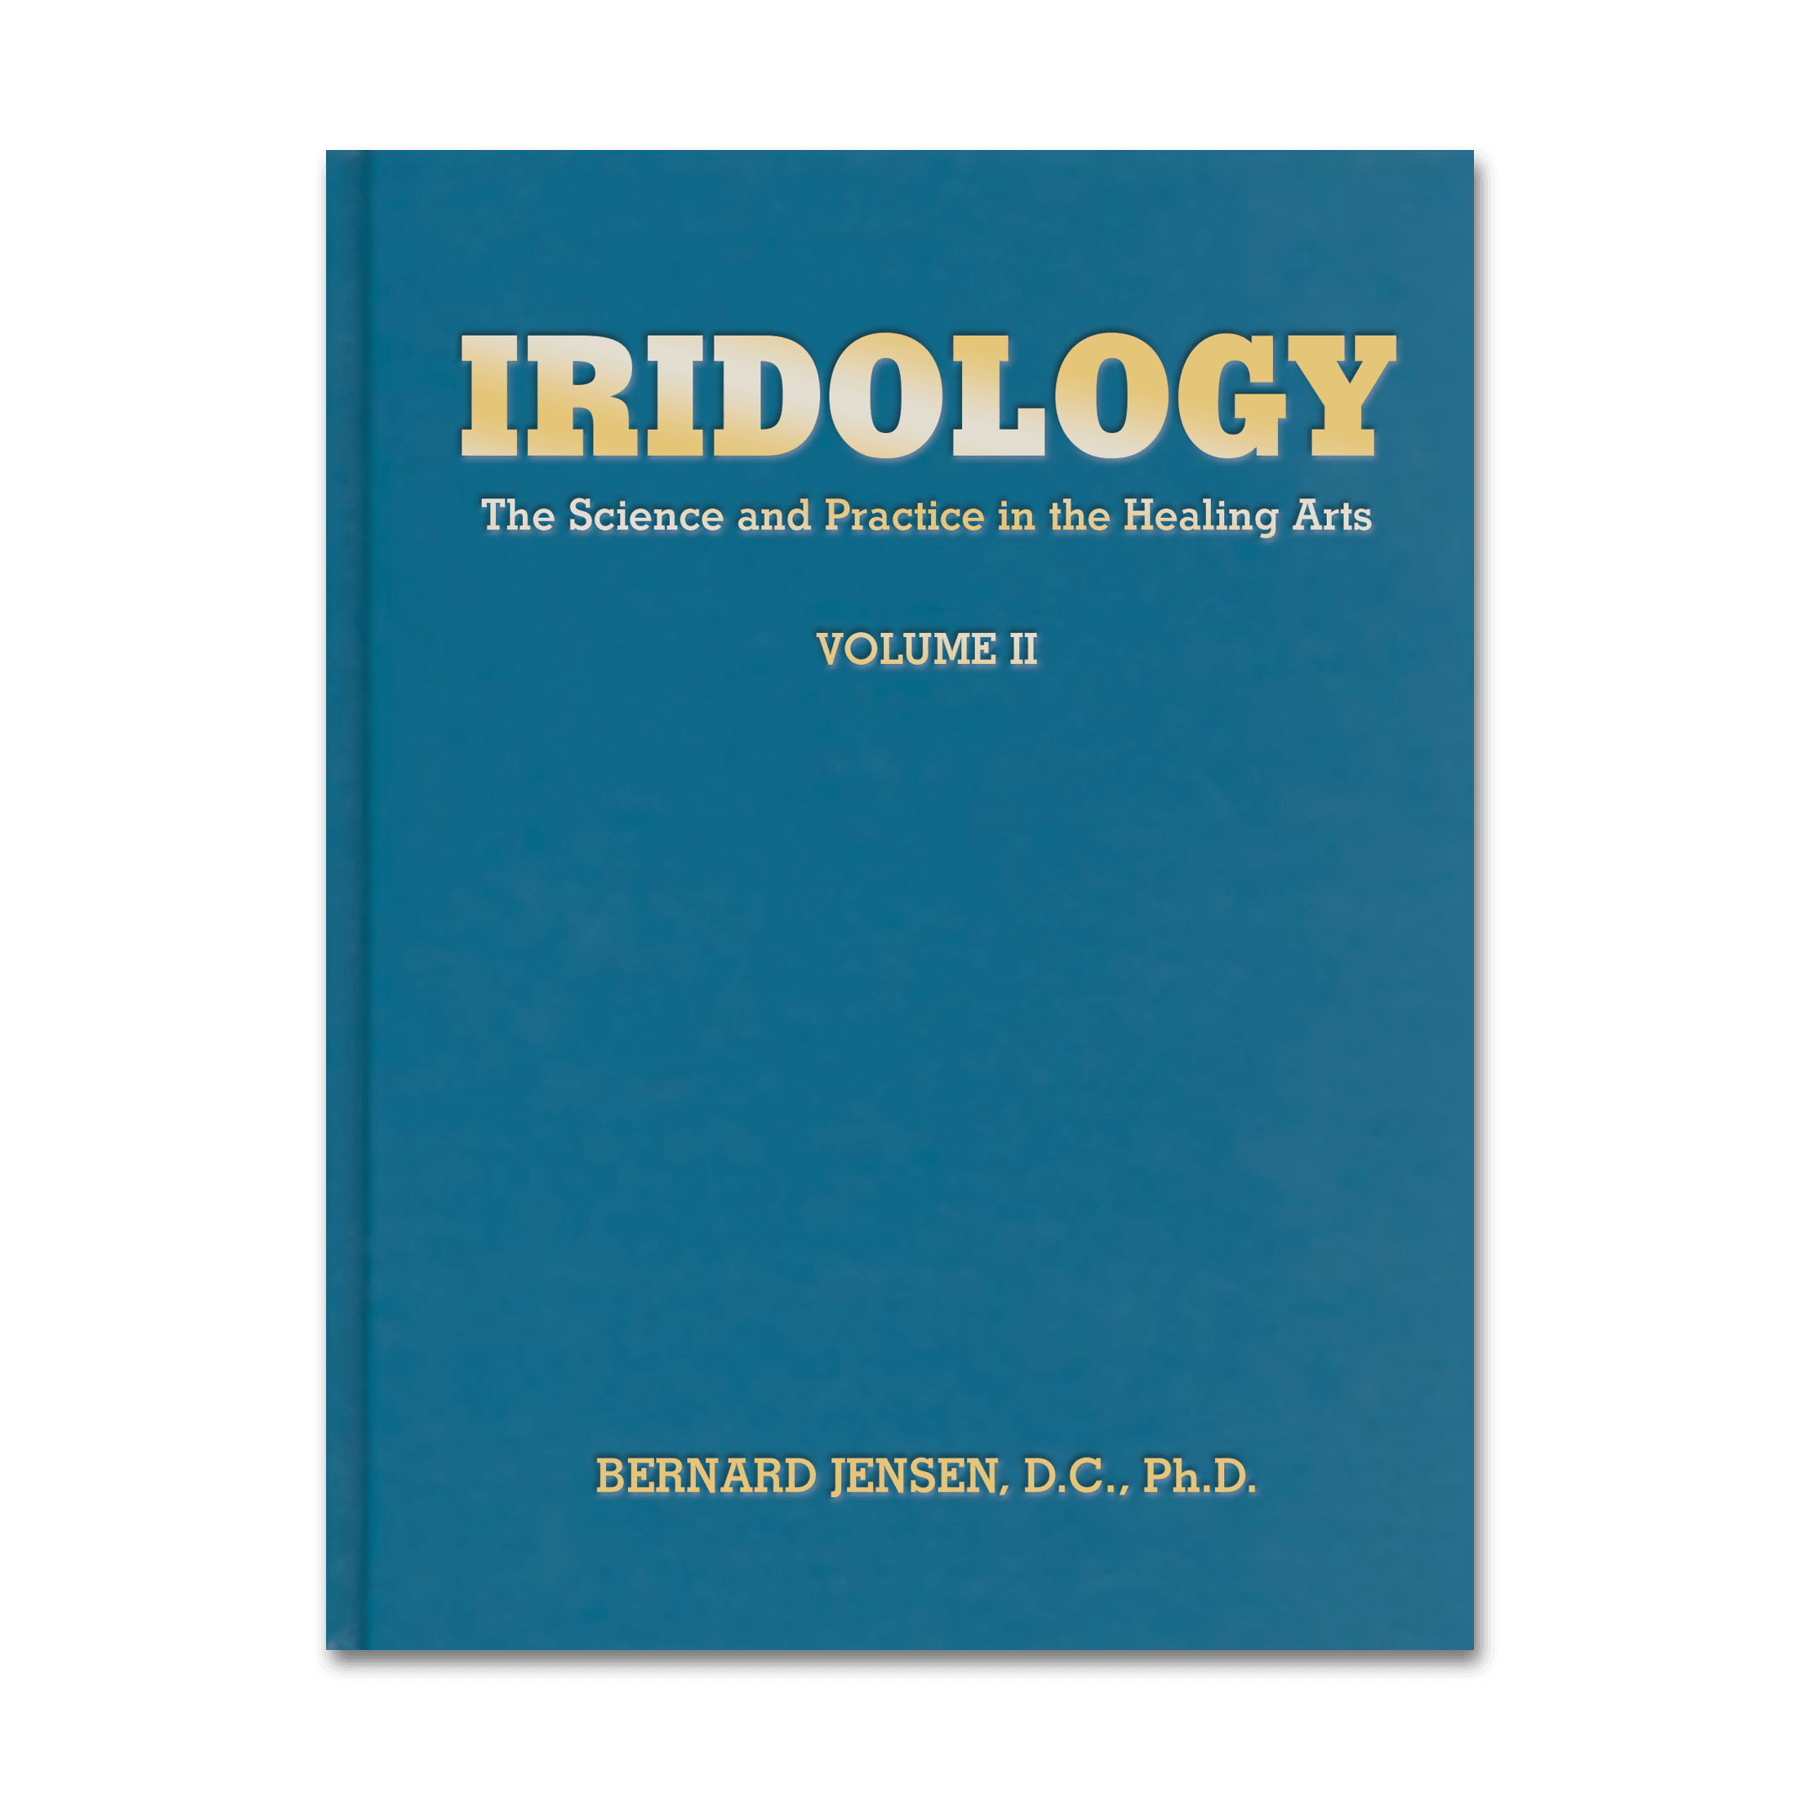 Iridology: Science and Practice in the Healing Arts, Vol. 2